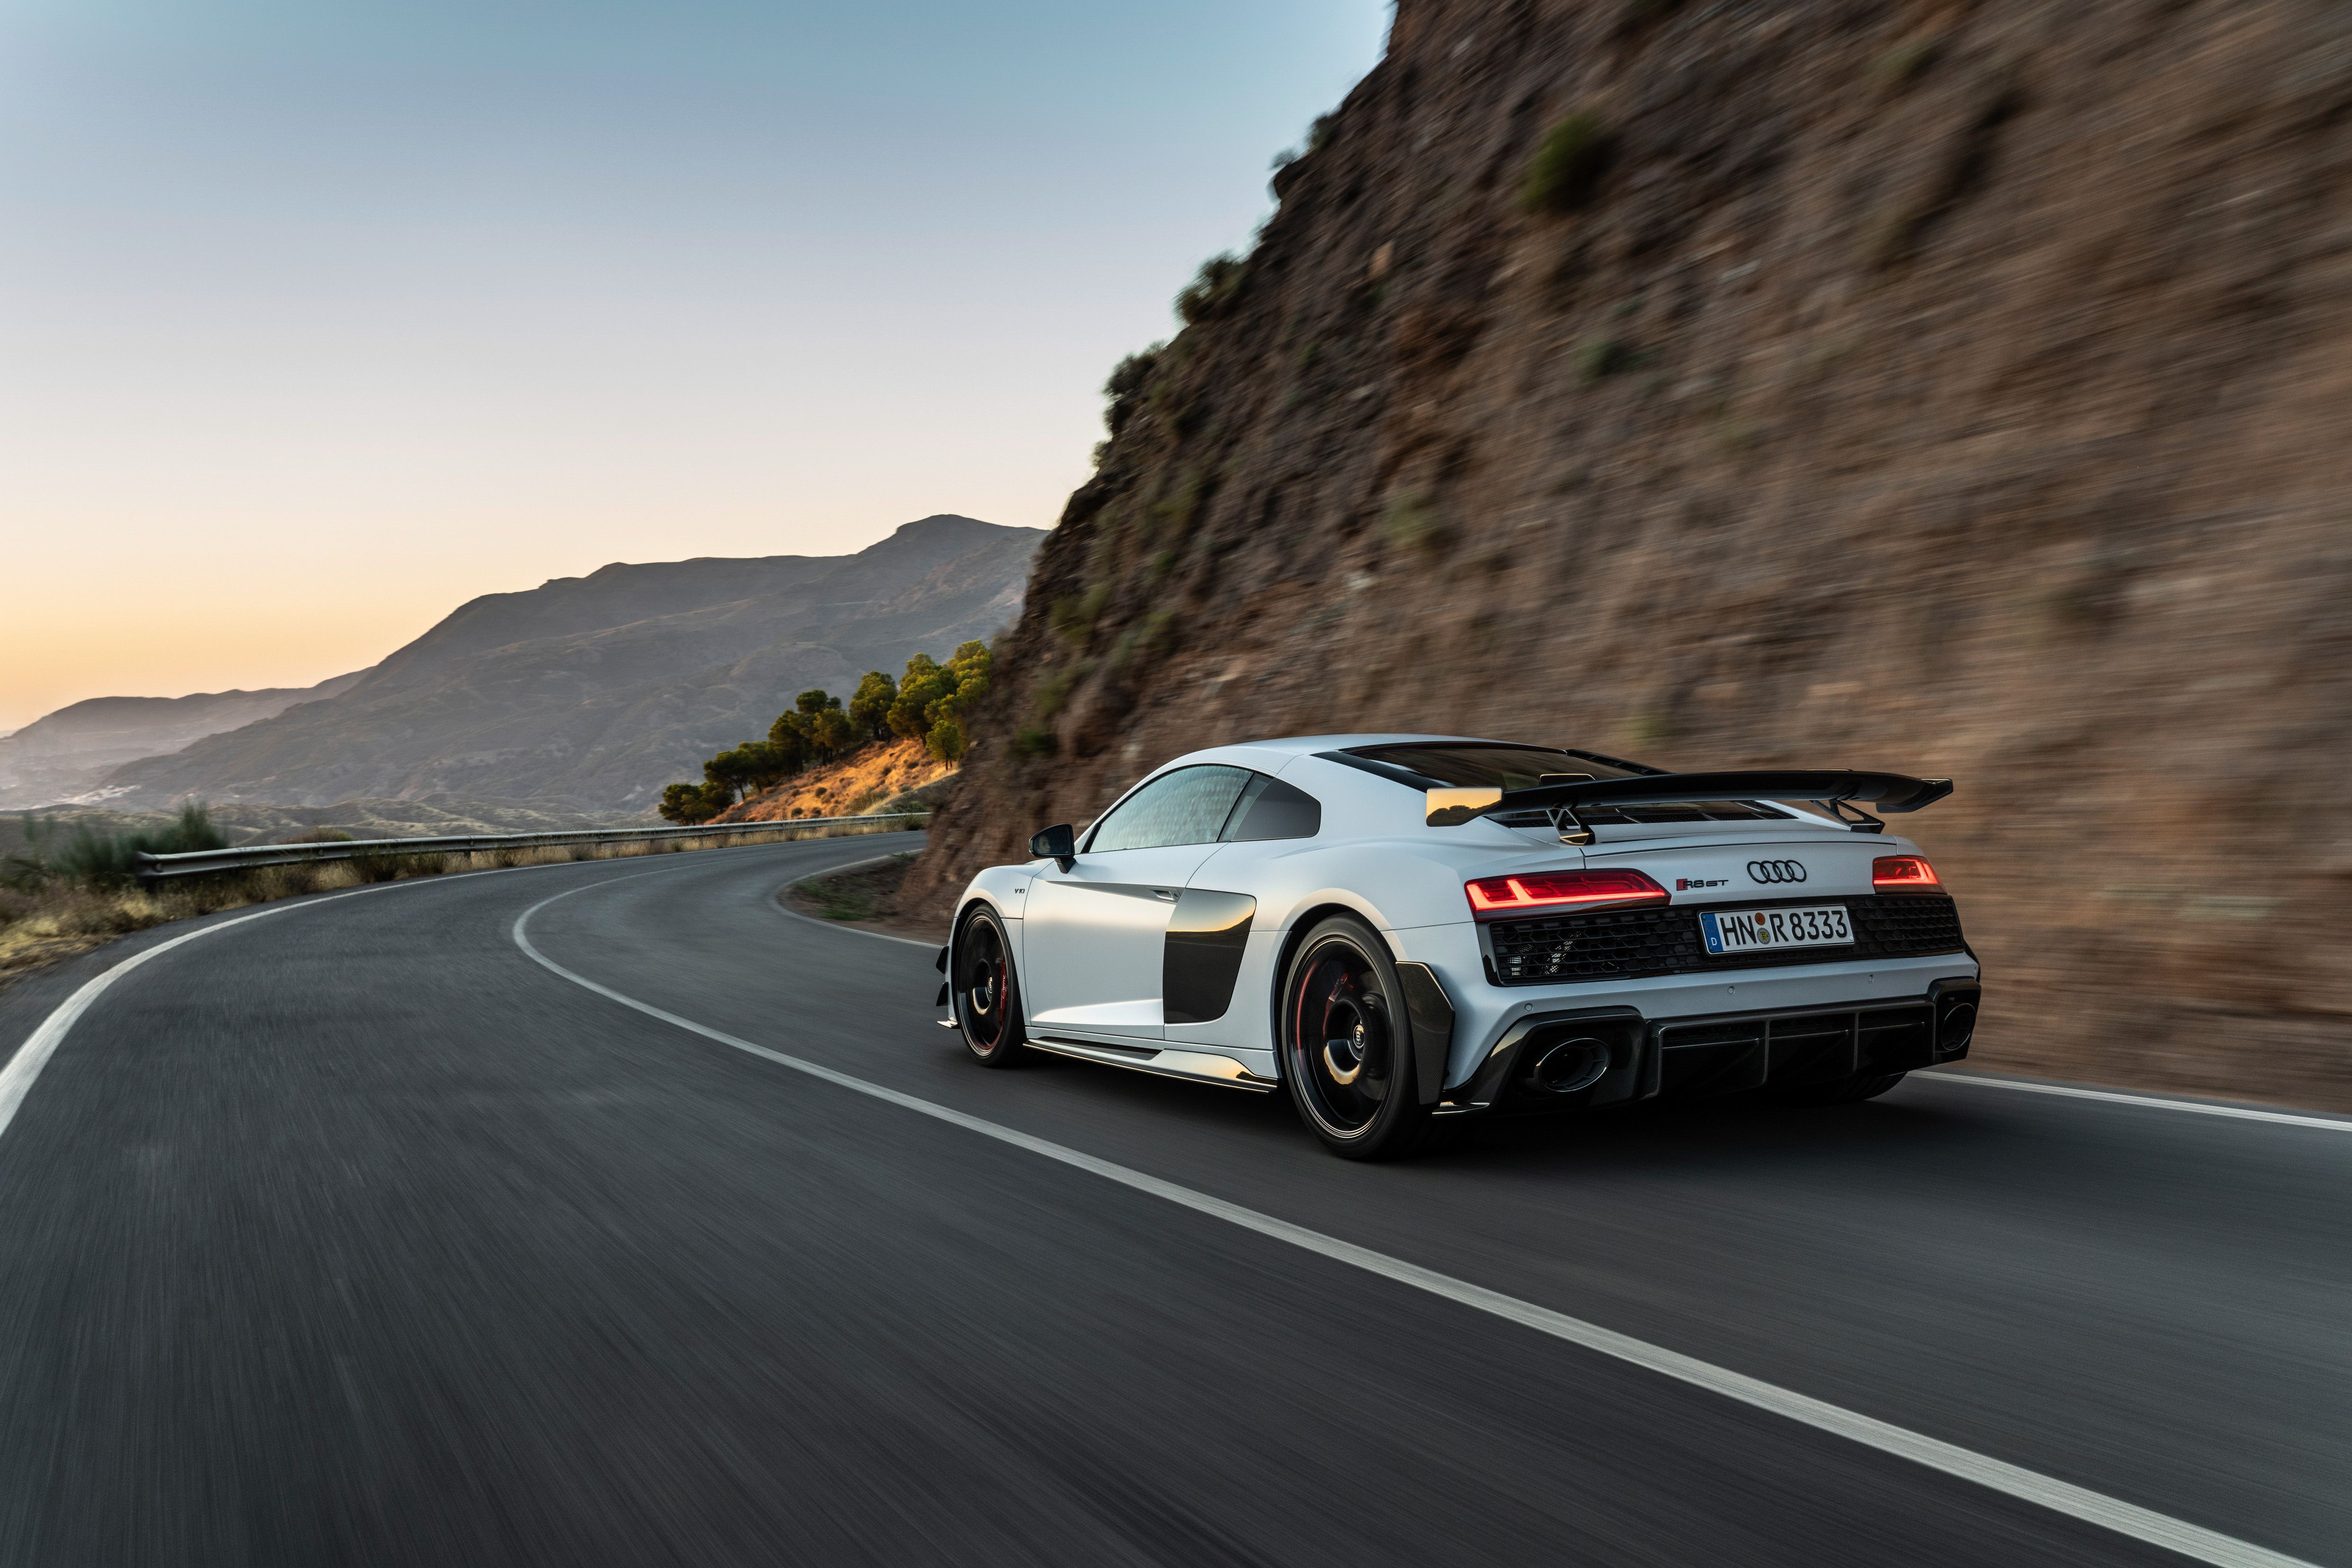 Audi R8 GT: Saving the Best For Last